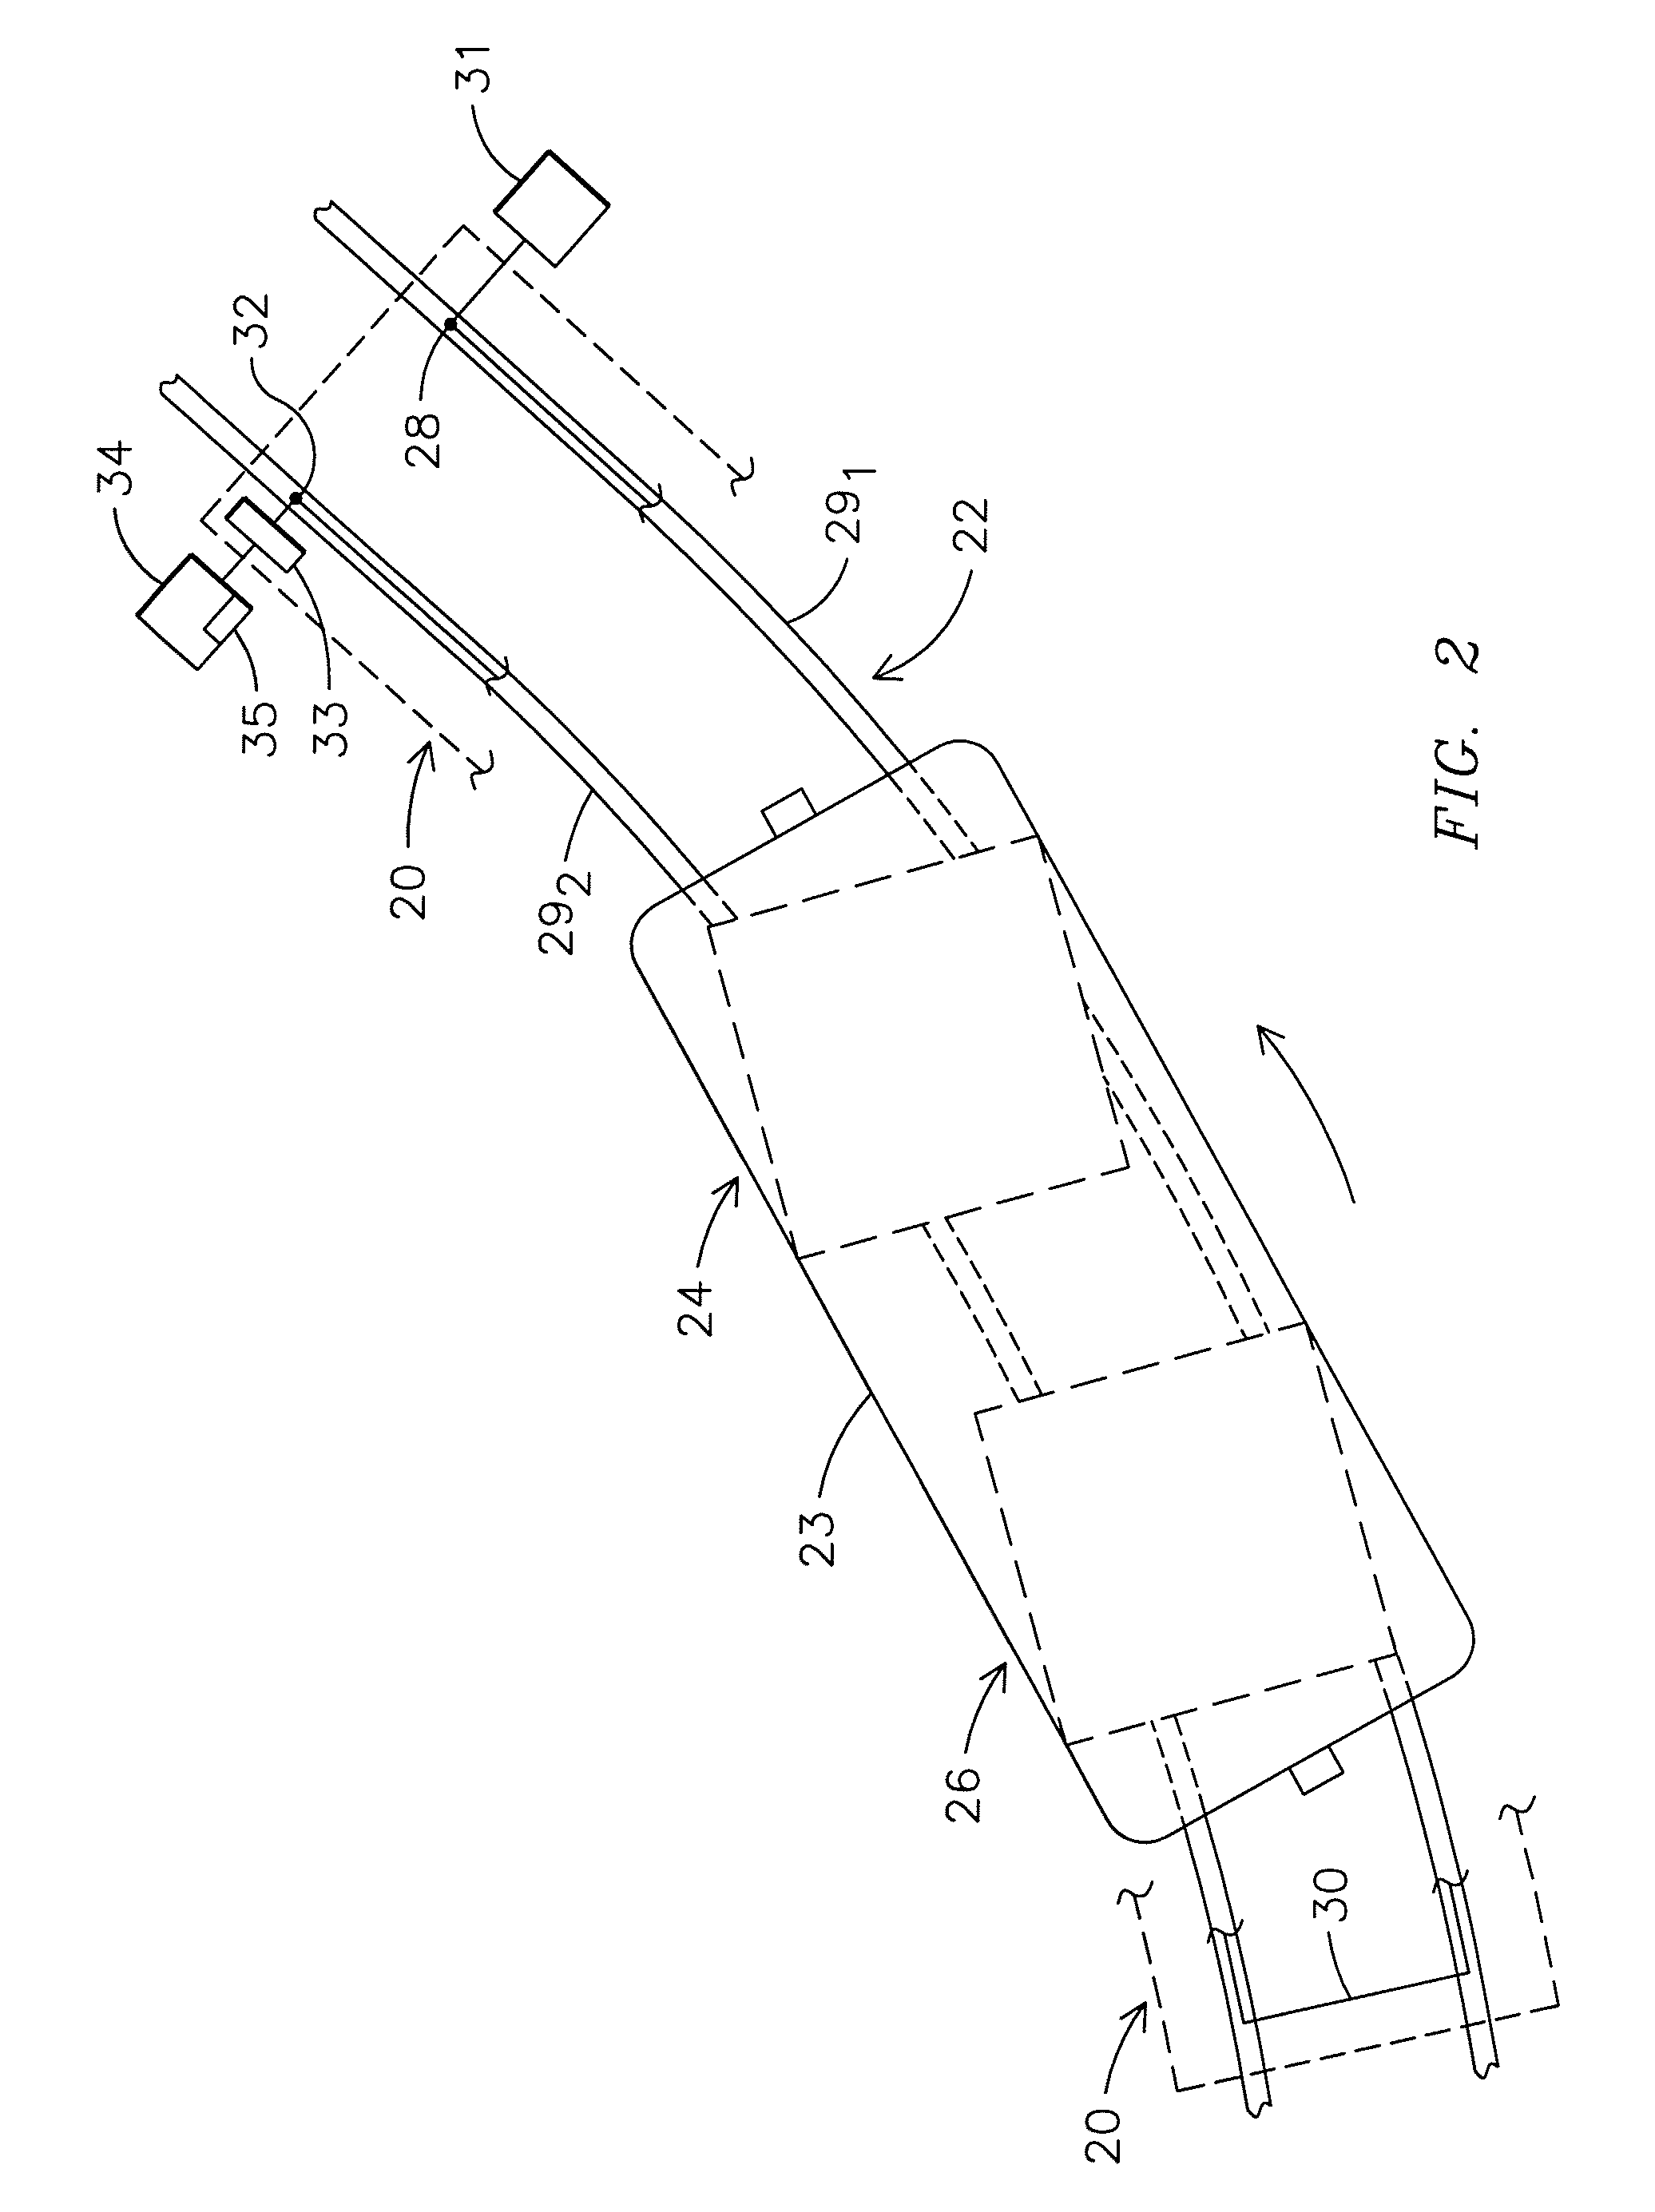 System, Method, and Computer-Readable Media For Monitoring Motion of Railcars In A Railroad Yard